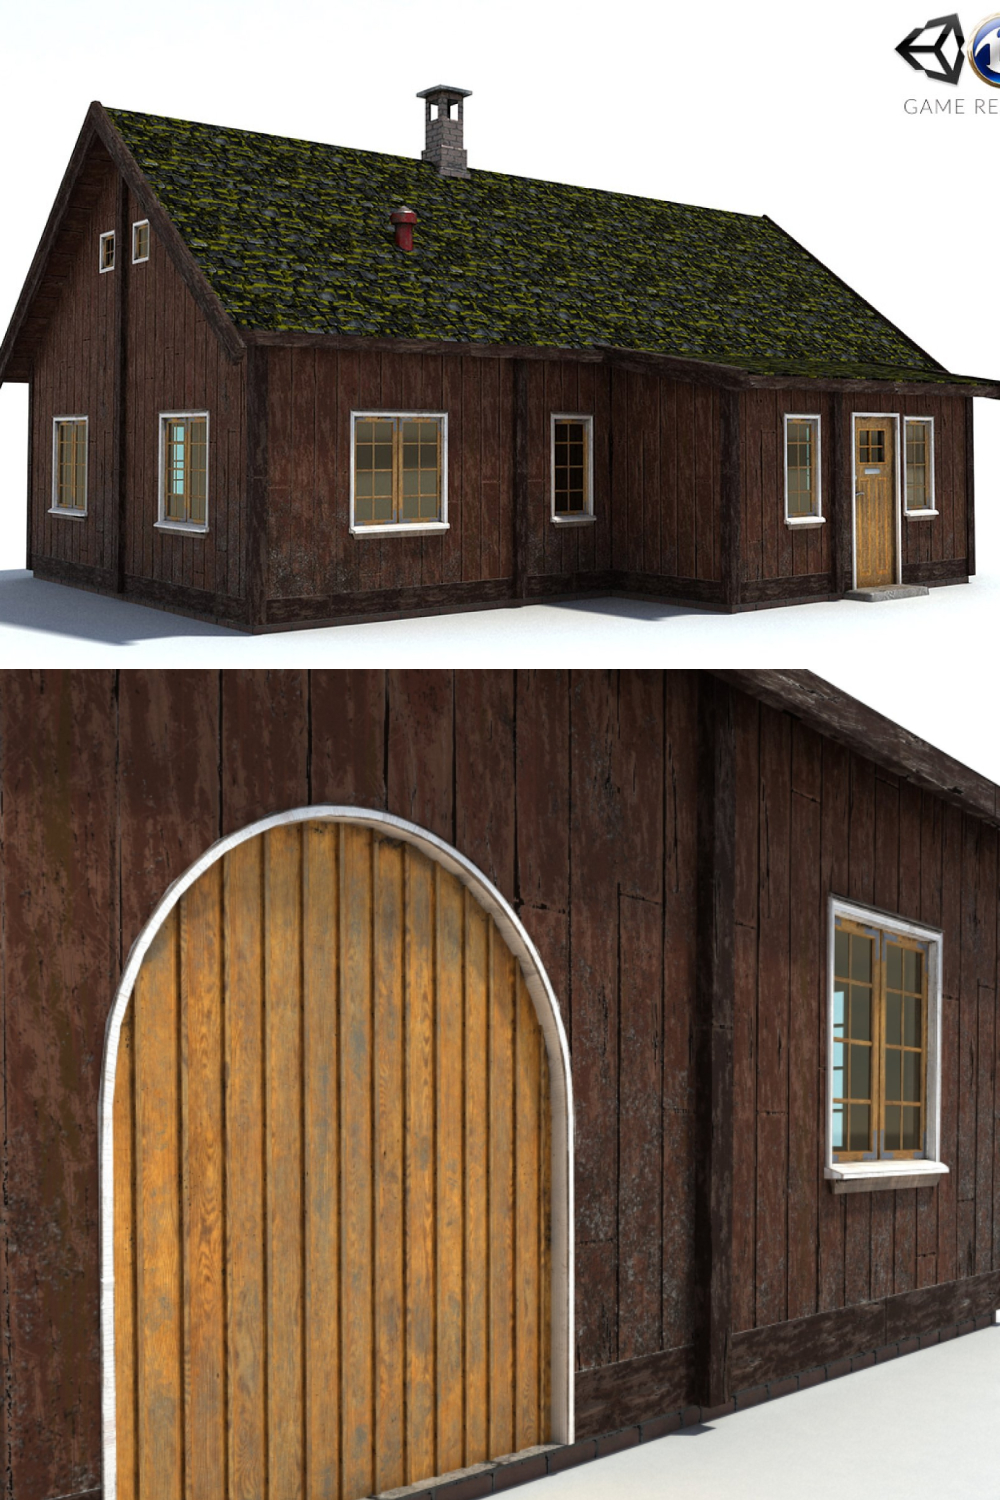 Old House Low Poly Pbr - Pinterest.